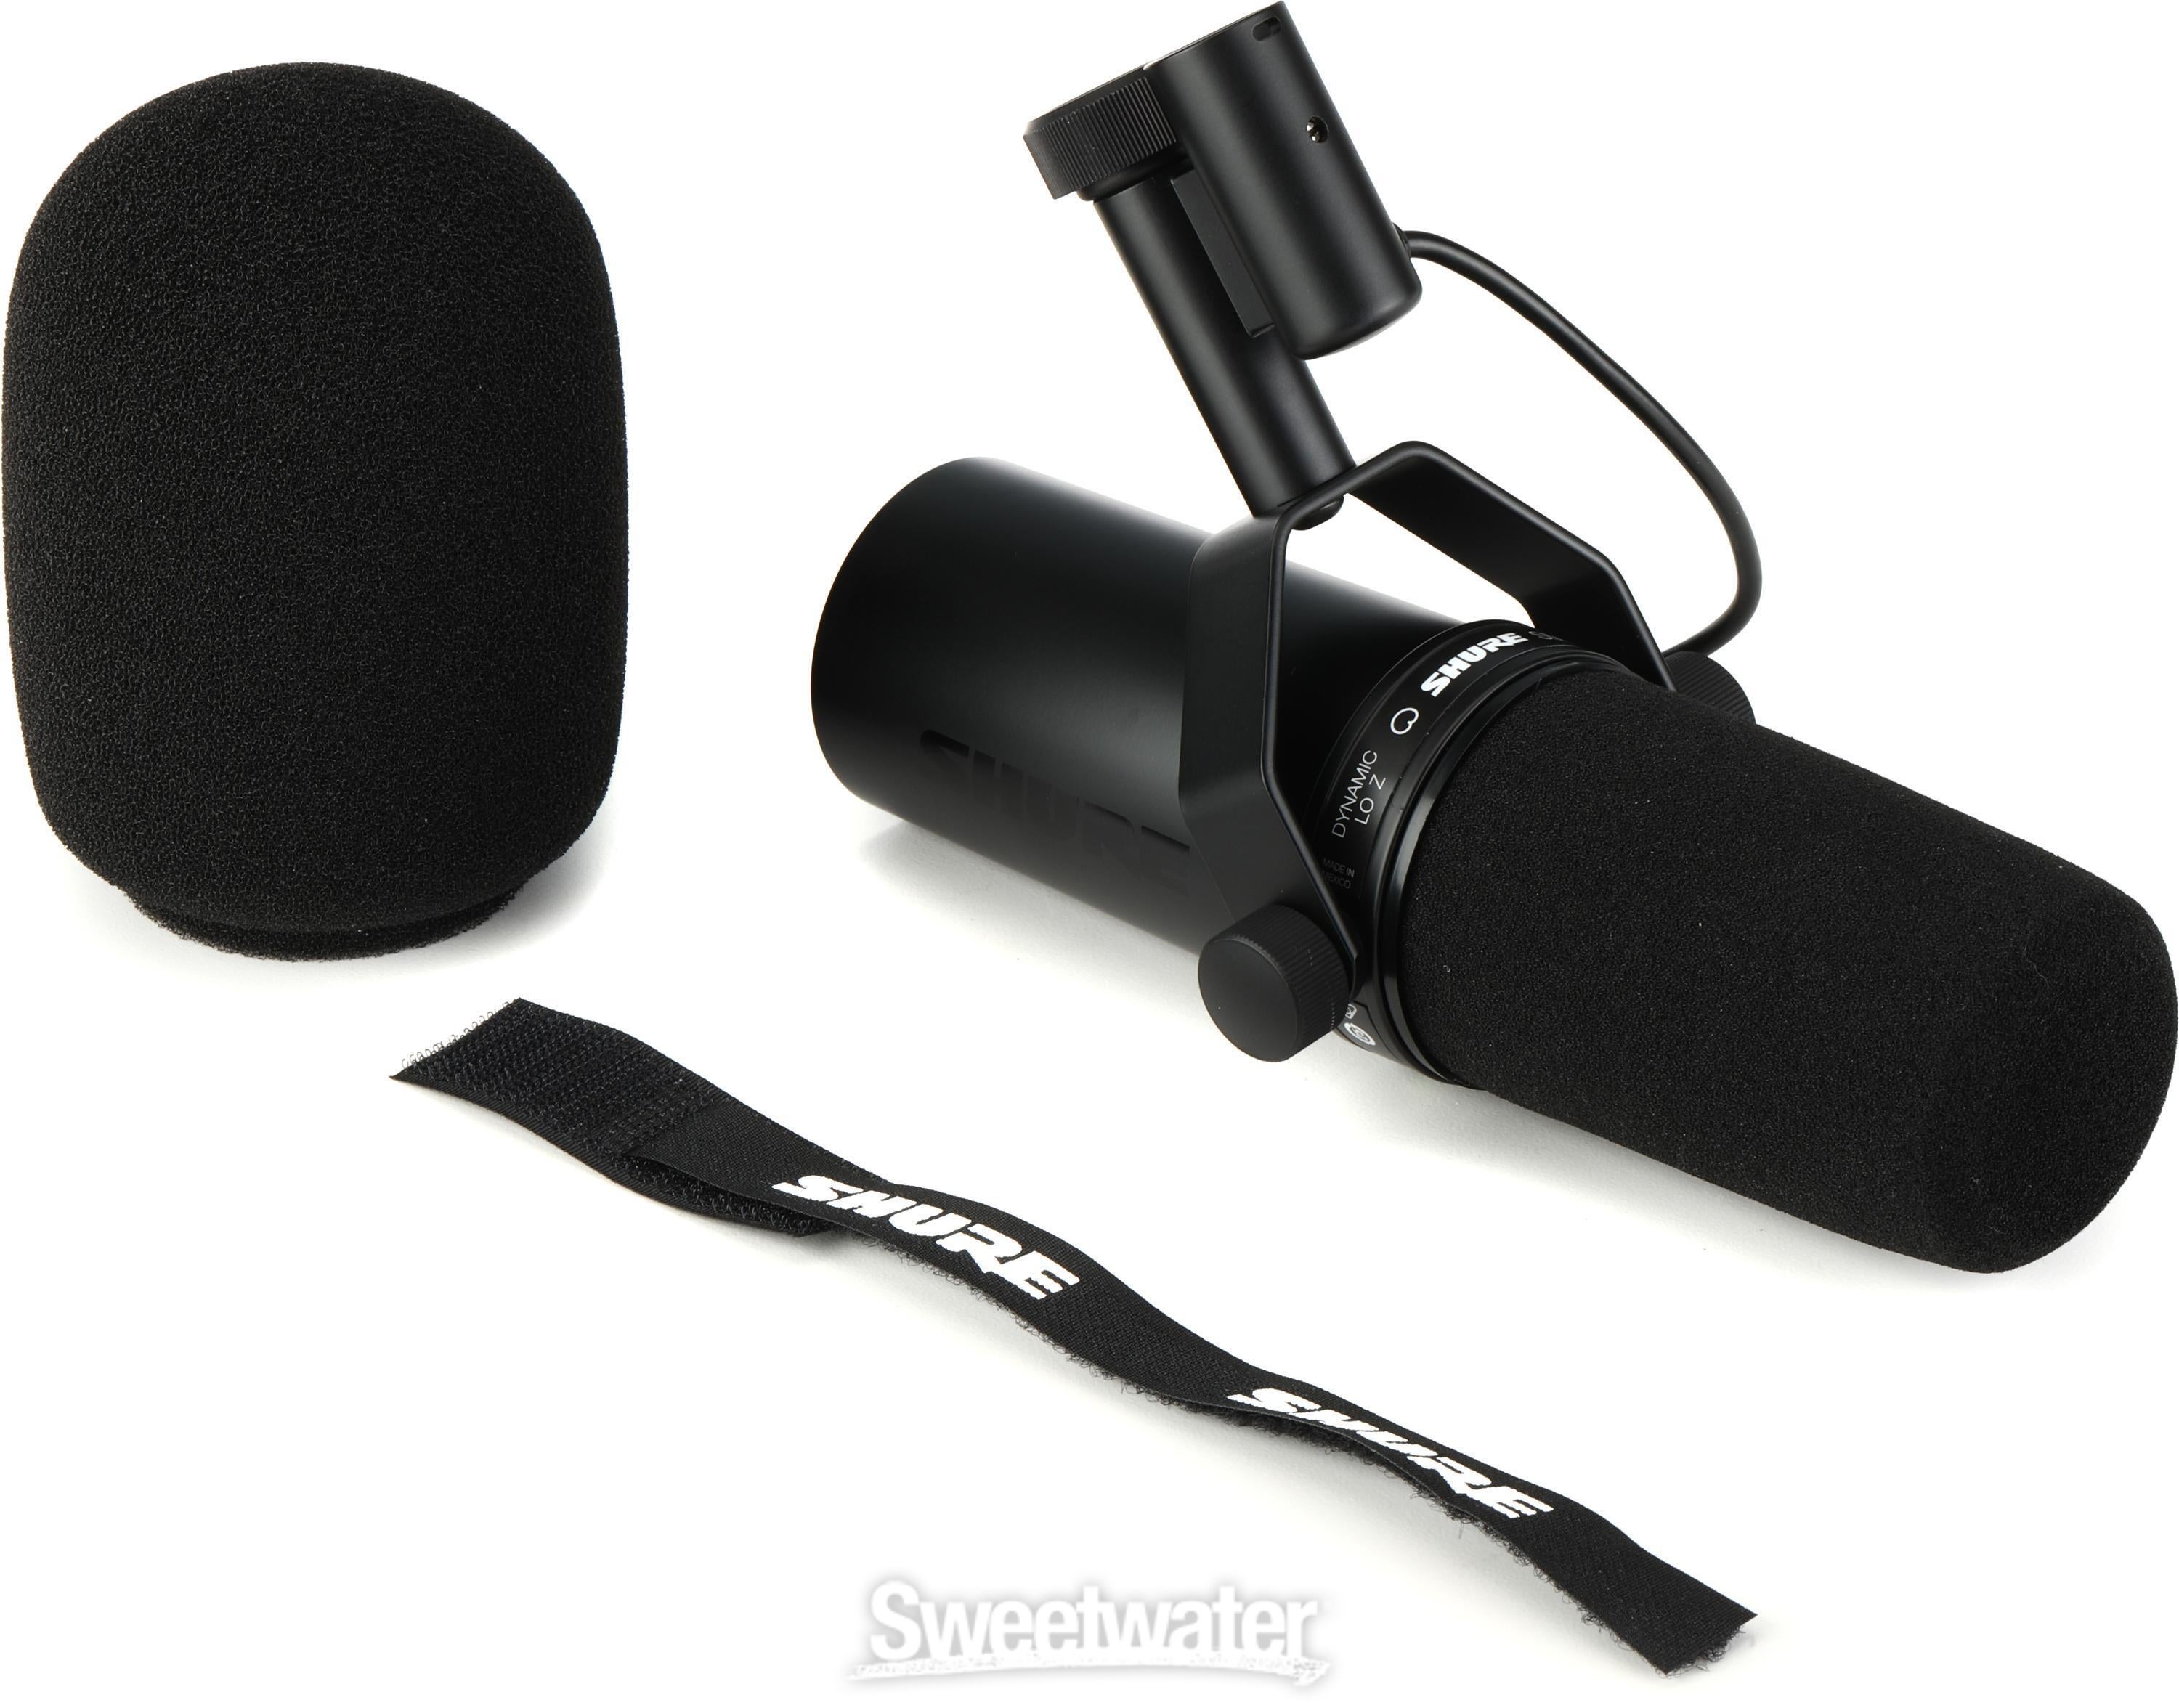 Shure SM7dB - Newsshooter